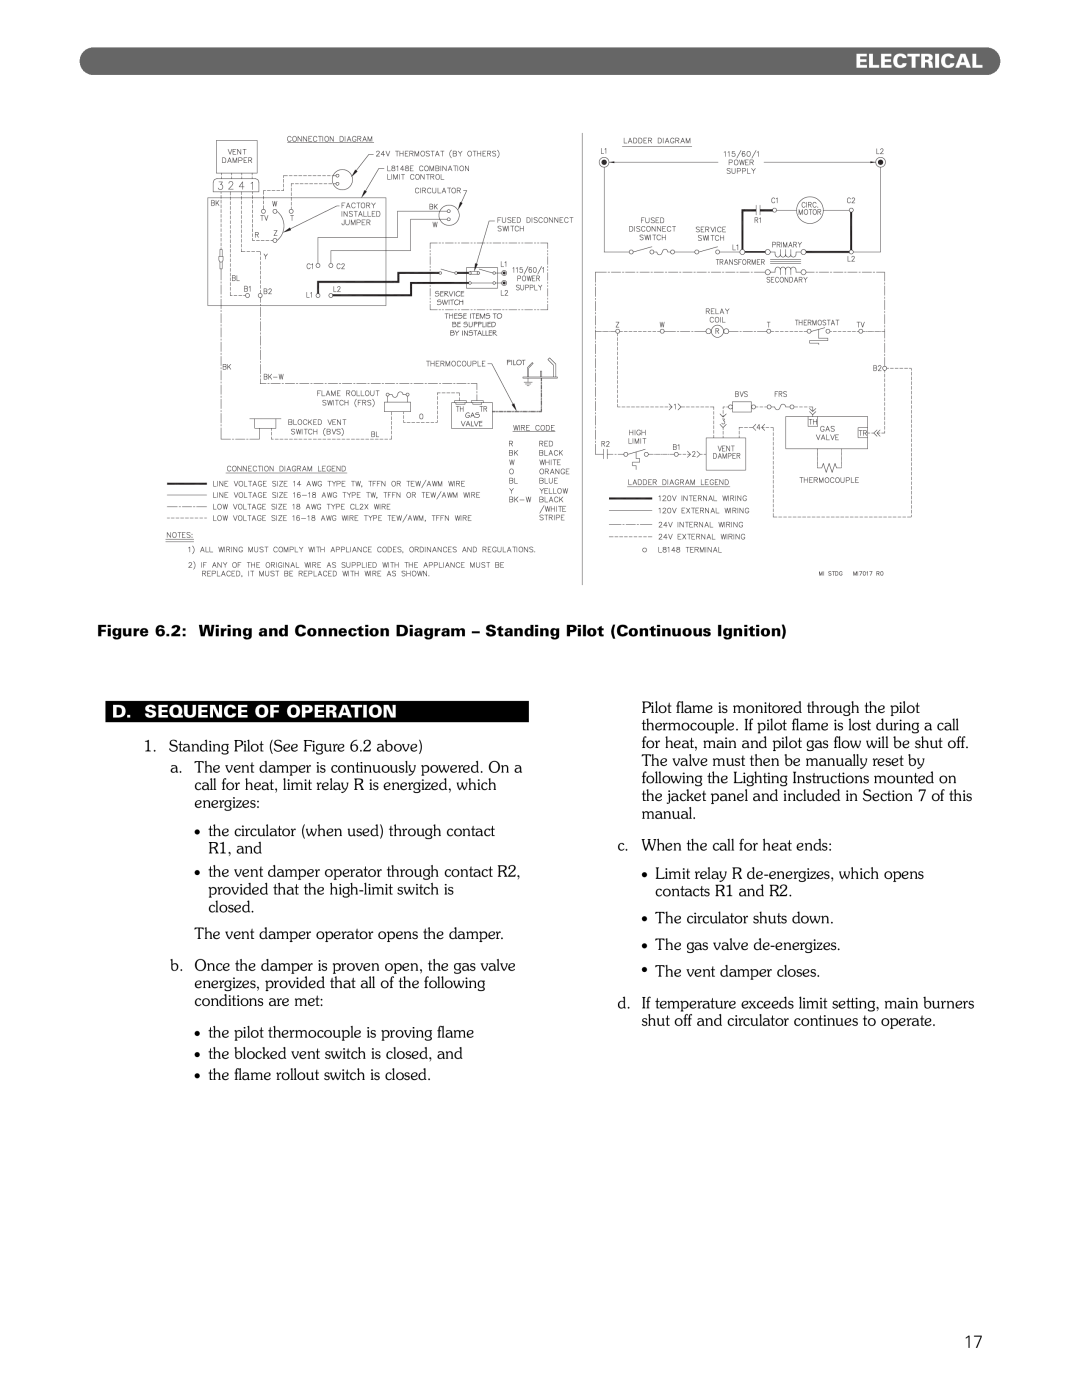 PB Heat MI/MIH series manual Electrical, D.Sequence Of Operation 